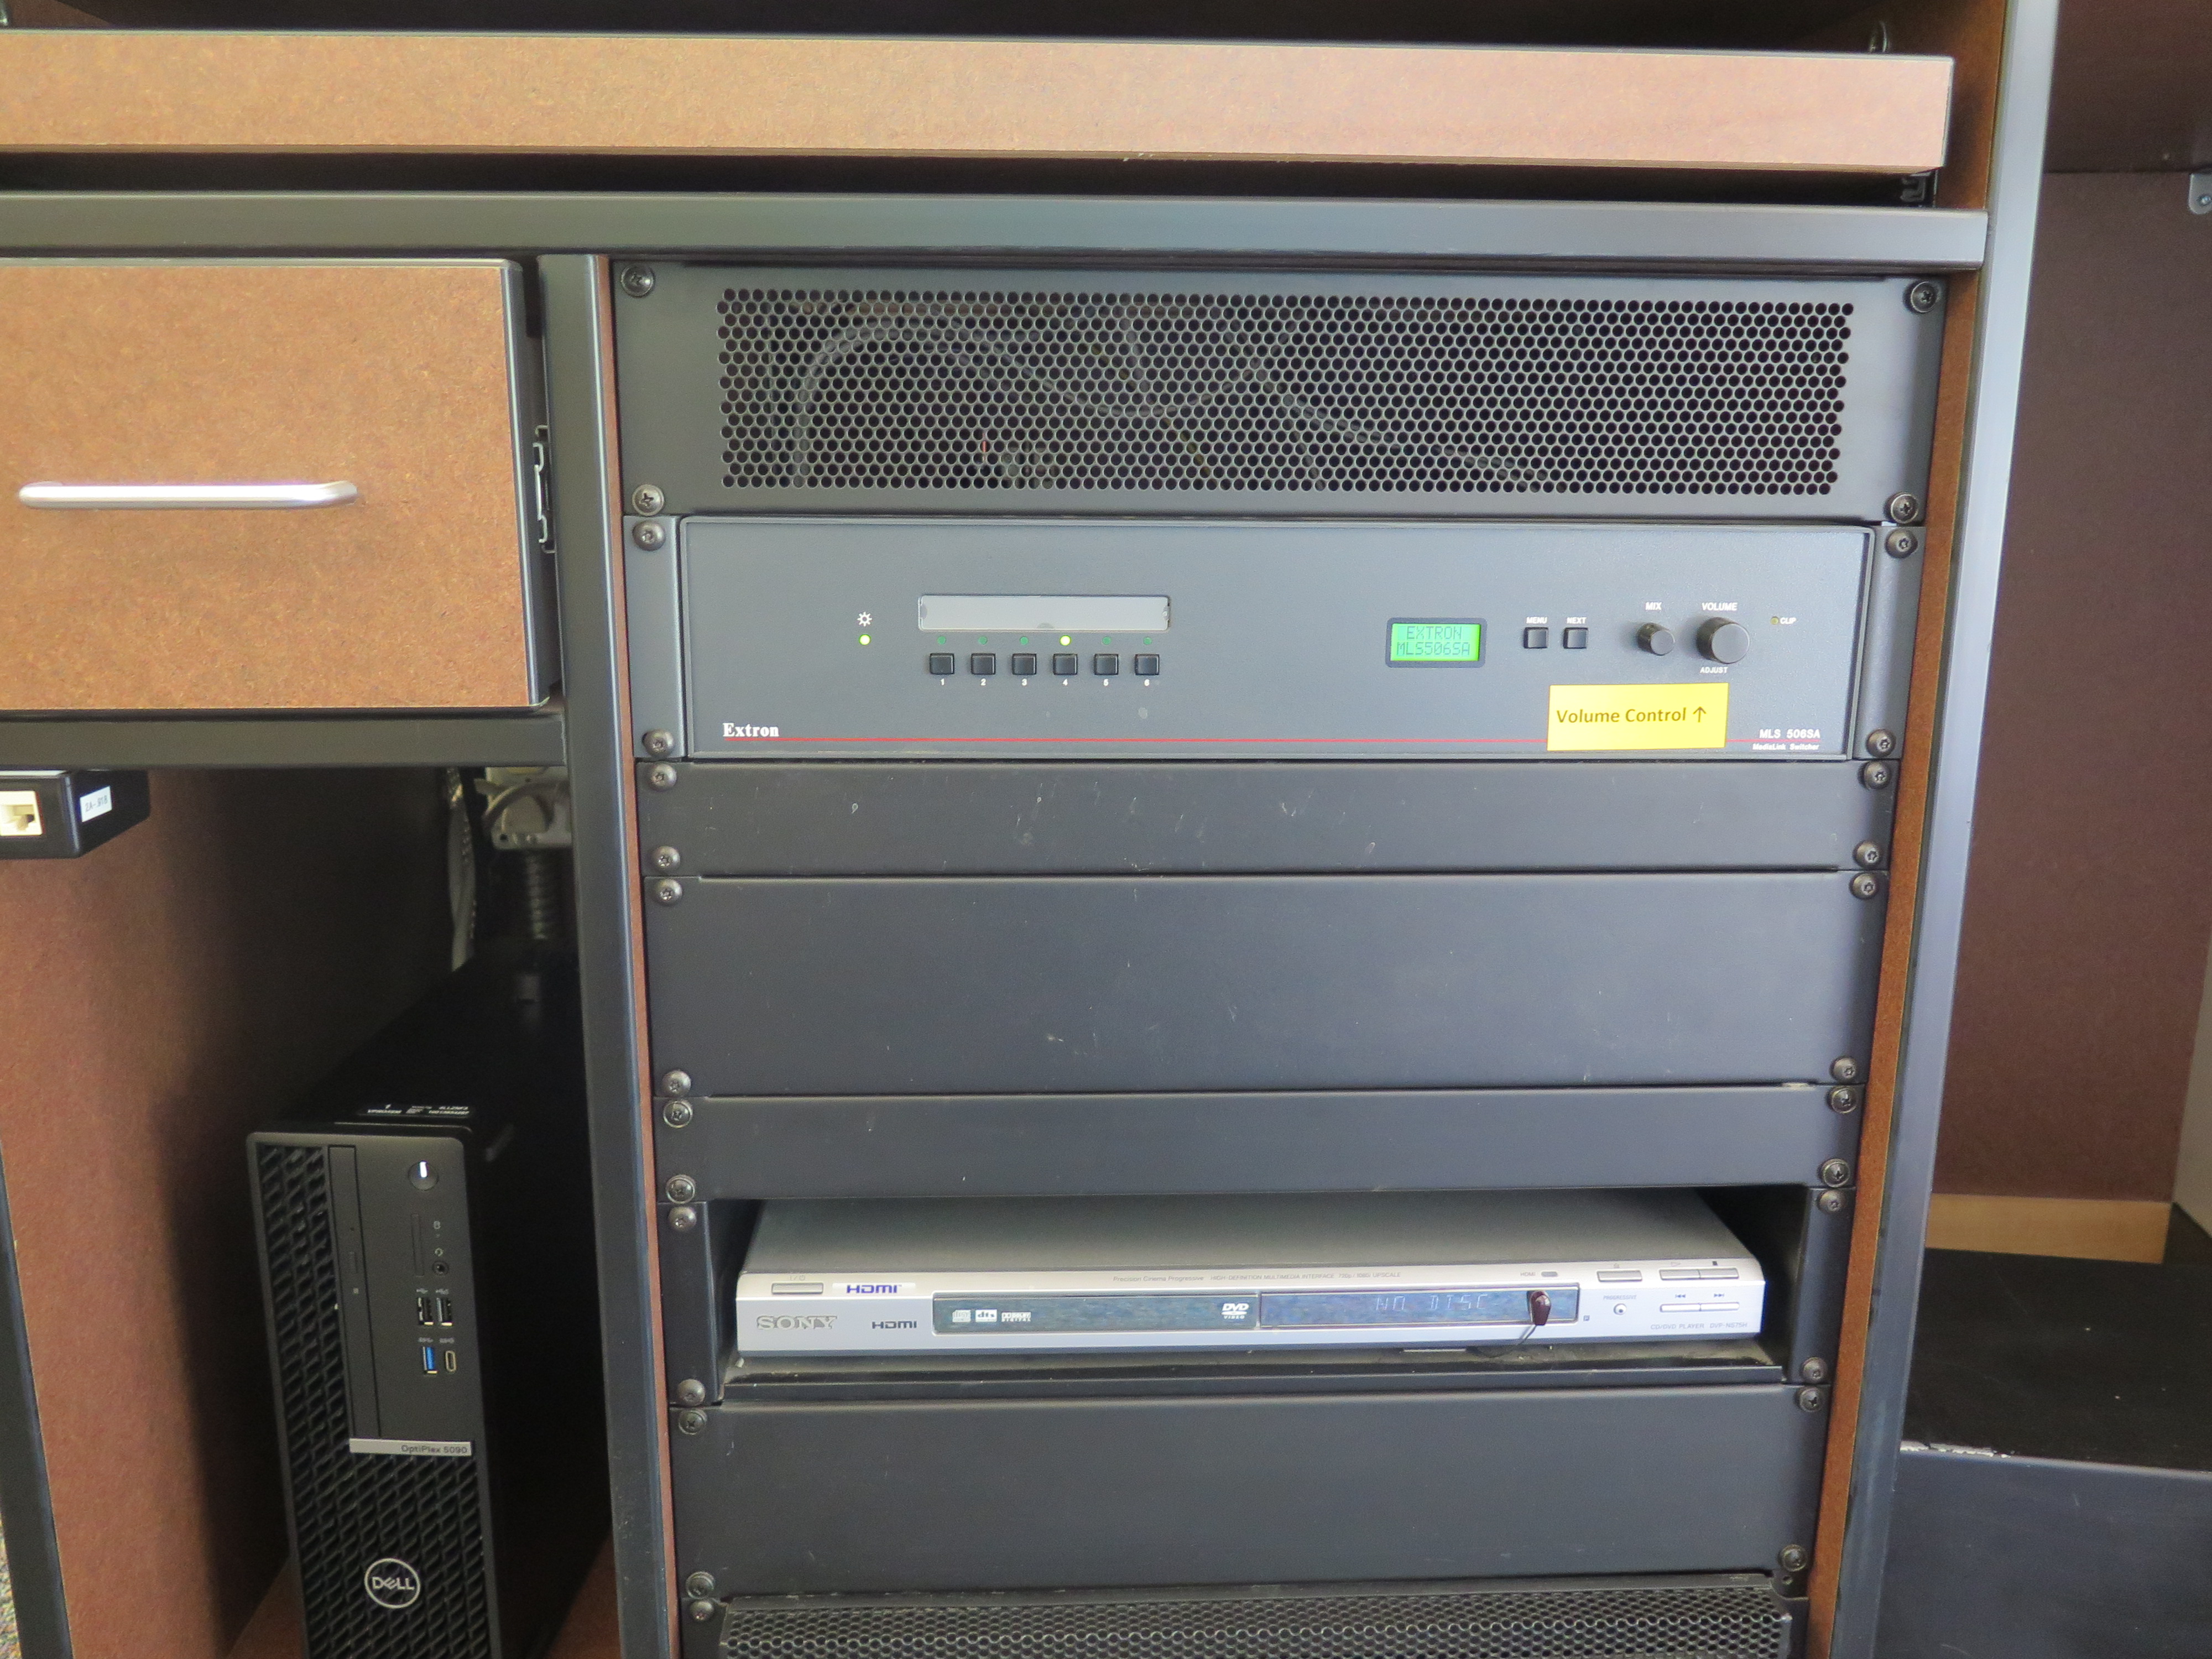 Display rack consists of a AV controller, DVD player and Dell Computer CPU.